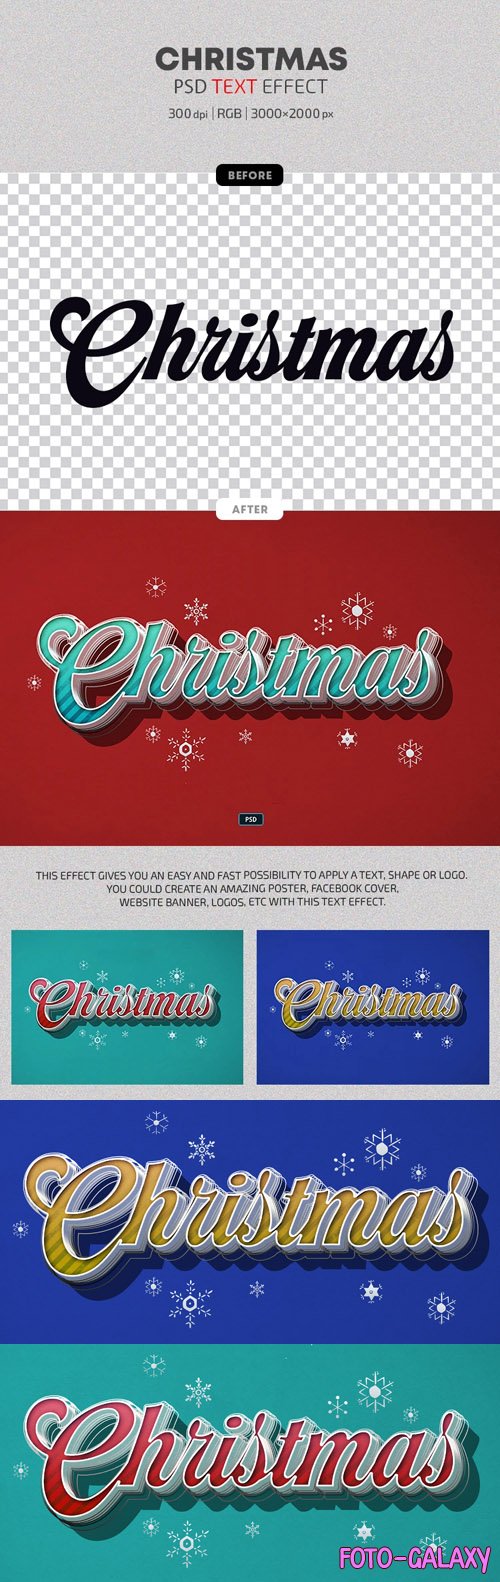 Christmas - Photoshop Text Effects